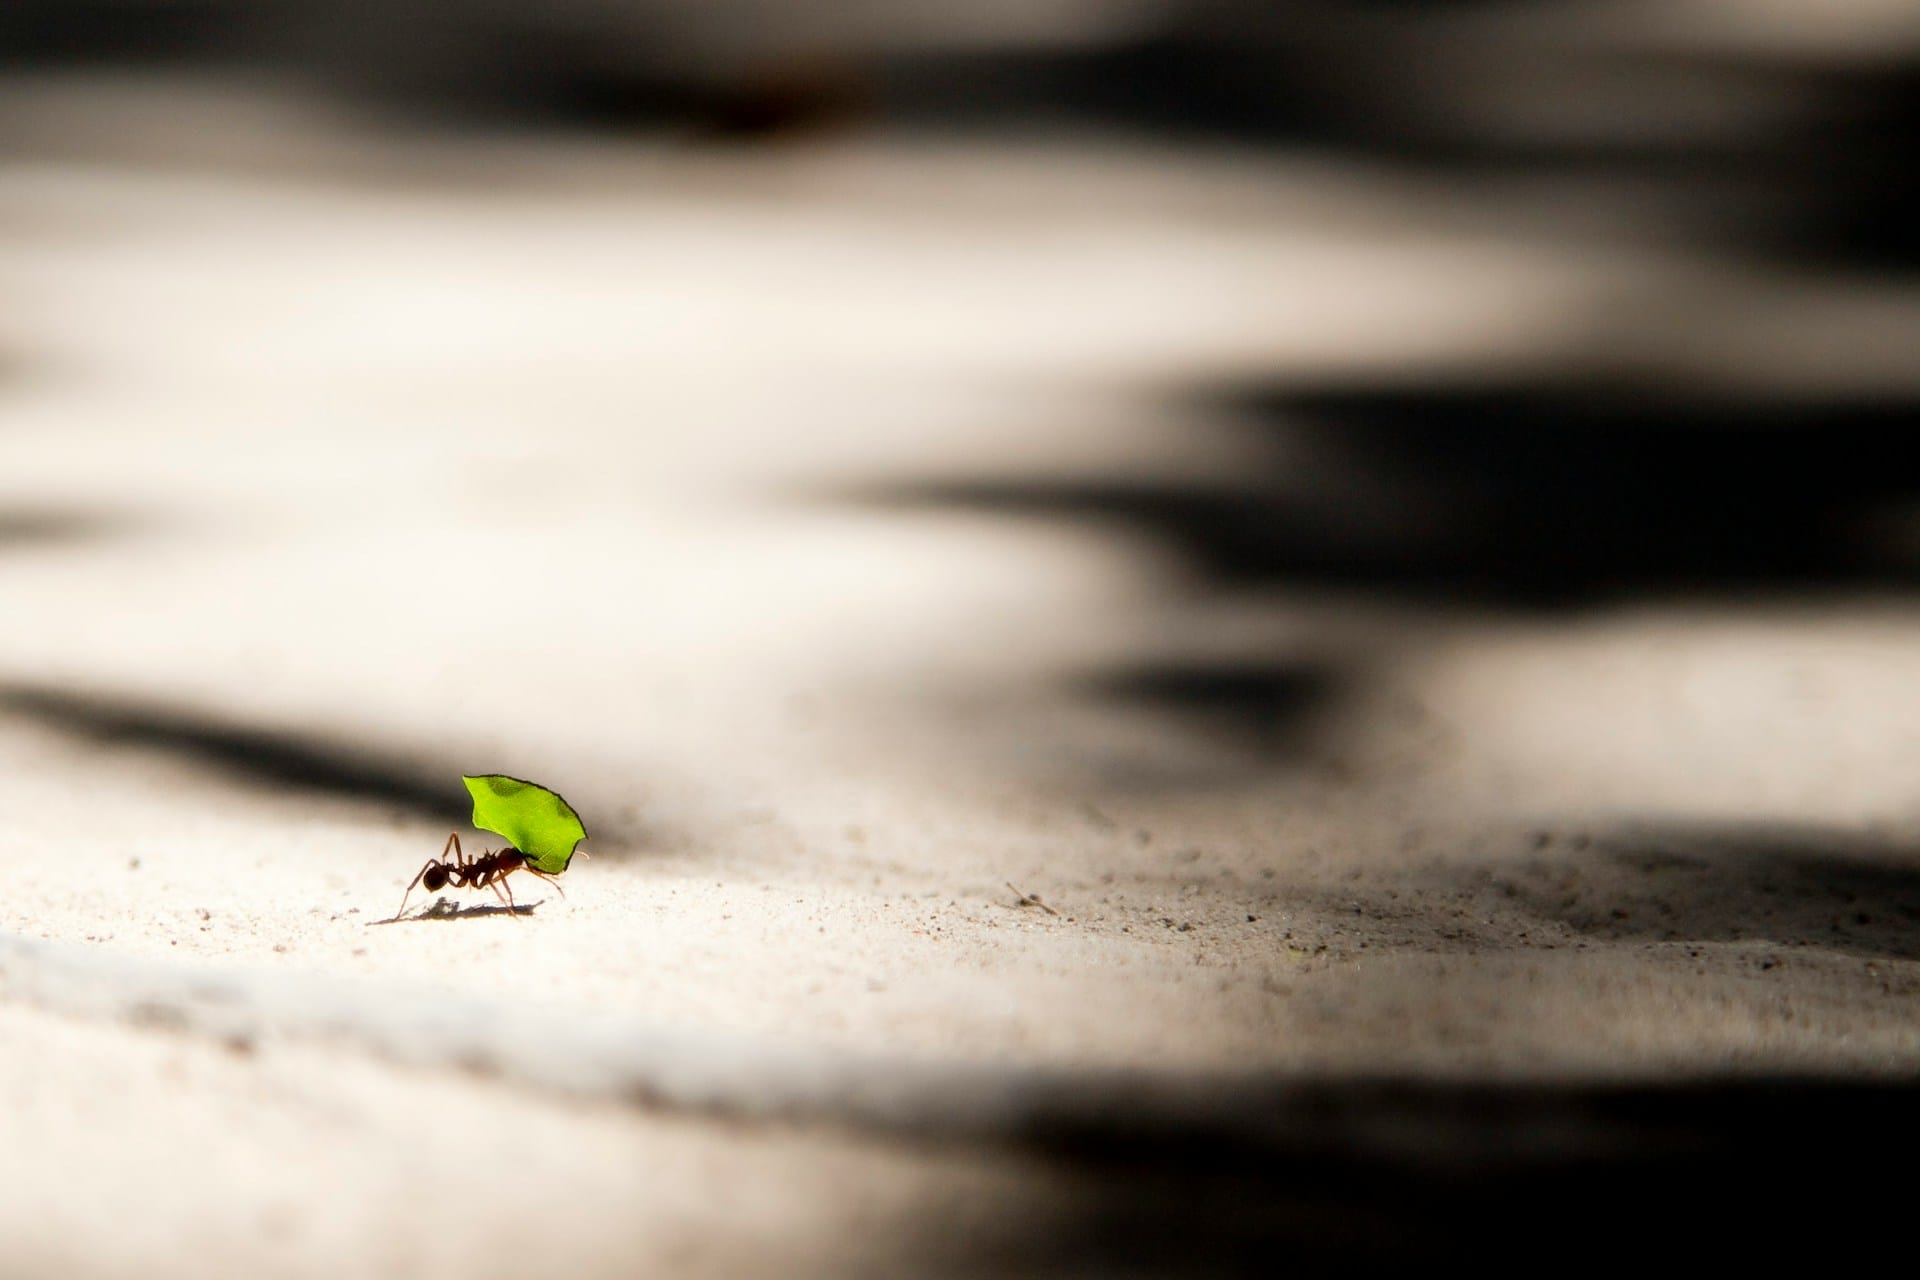 an ant carrying a leaf across a barren path